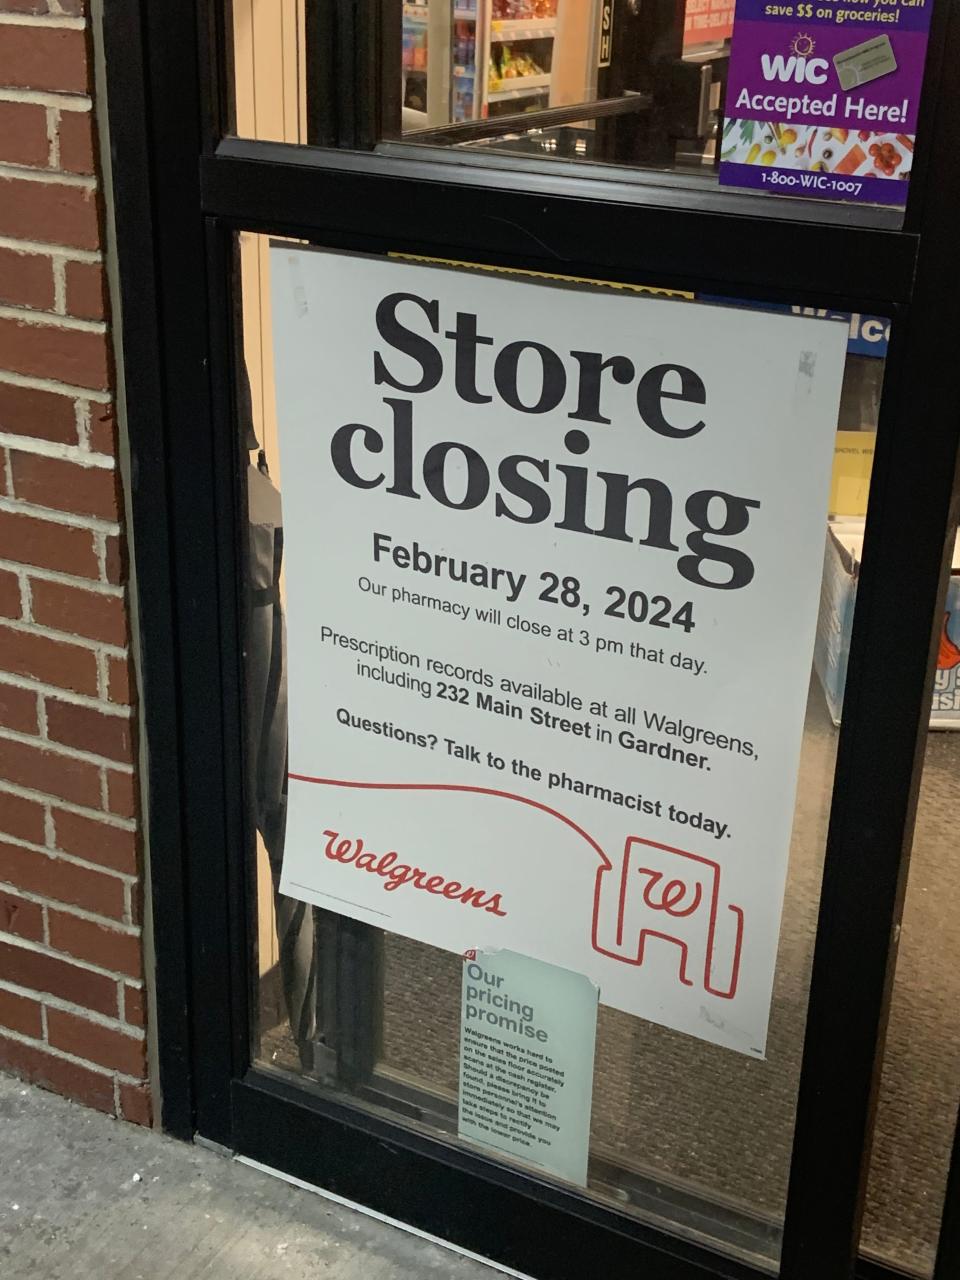 A sign on the door of the Walgreens in Gardner Plaza on Pearson Blvd. announces that the location will close at 3 p.m. on Wednesday, Feb. 28.